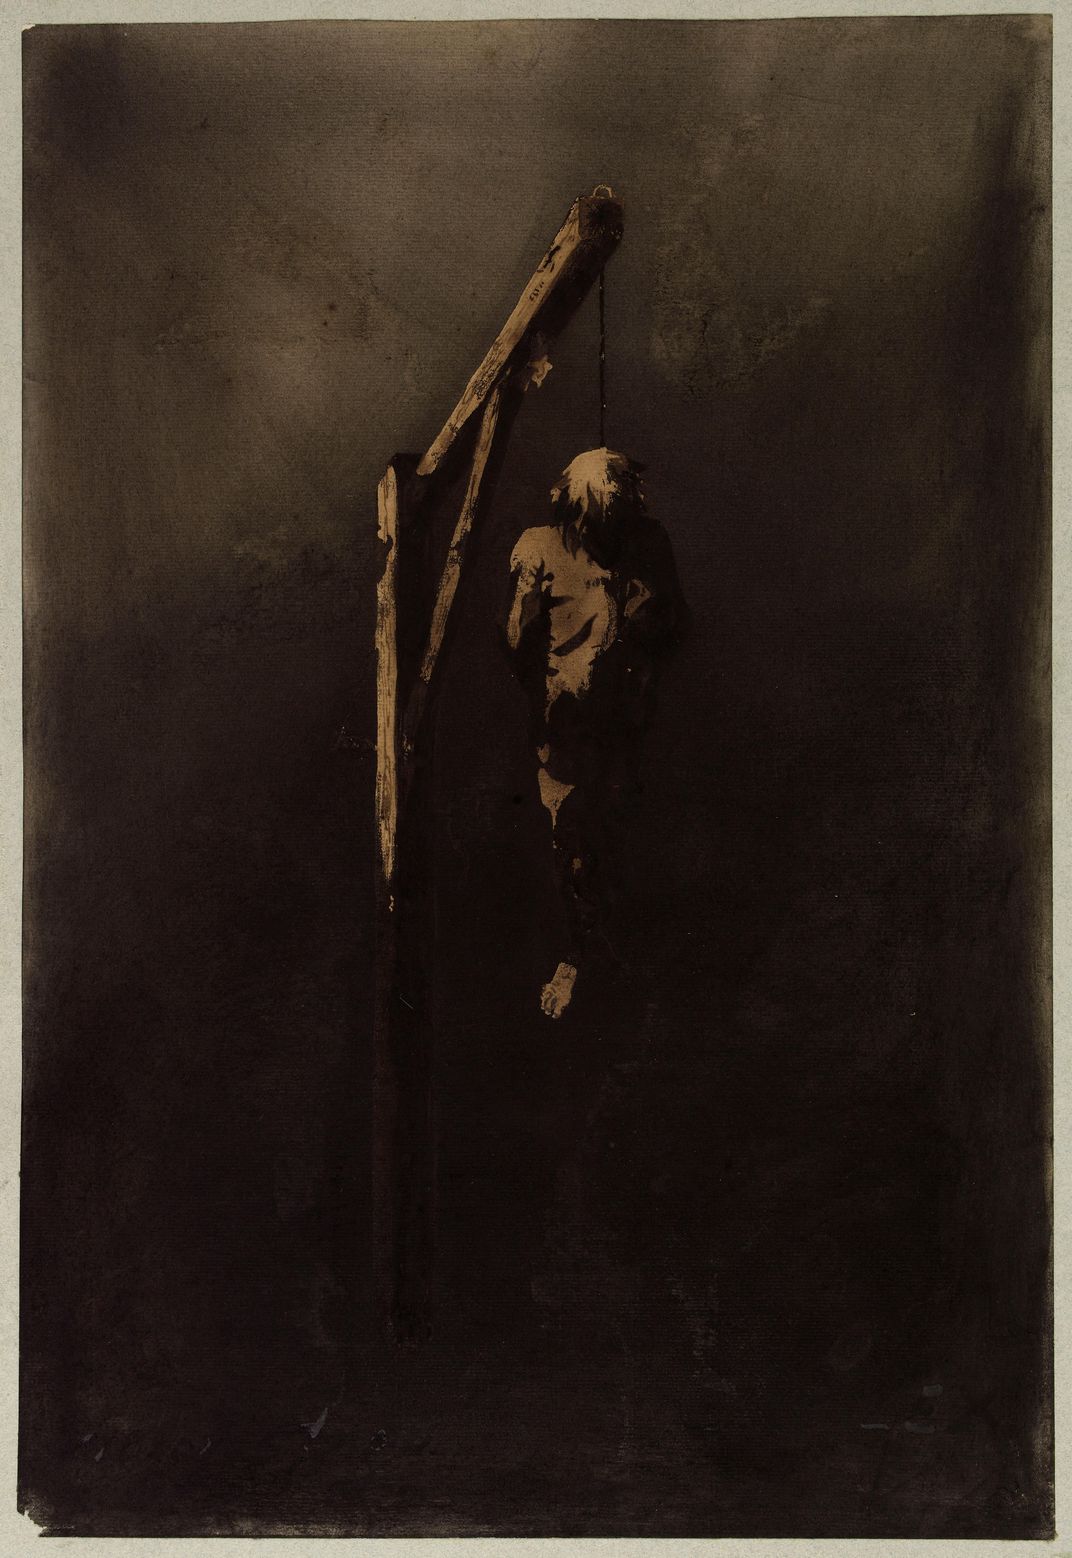 Victor hugo Ecce Lex (Le pendu) (Ecce Lex [hanged man]), 1854. Brown ink, brown and black wash, graphite, charcoal, and white gouache on paper.